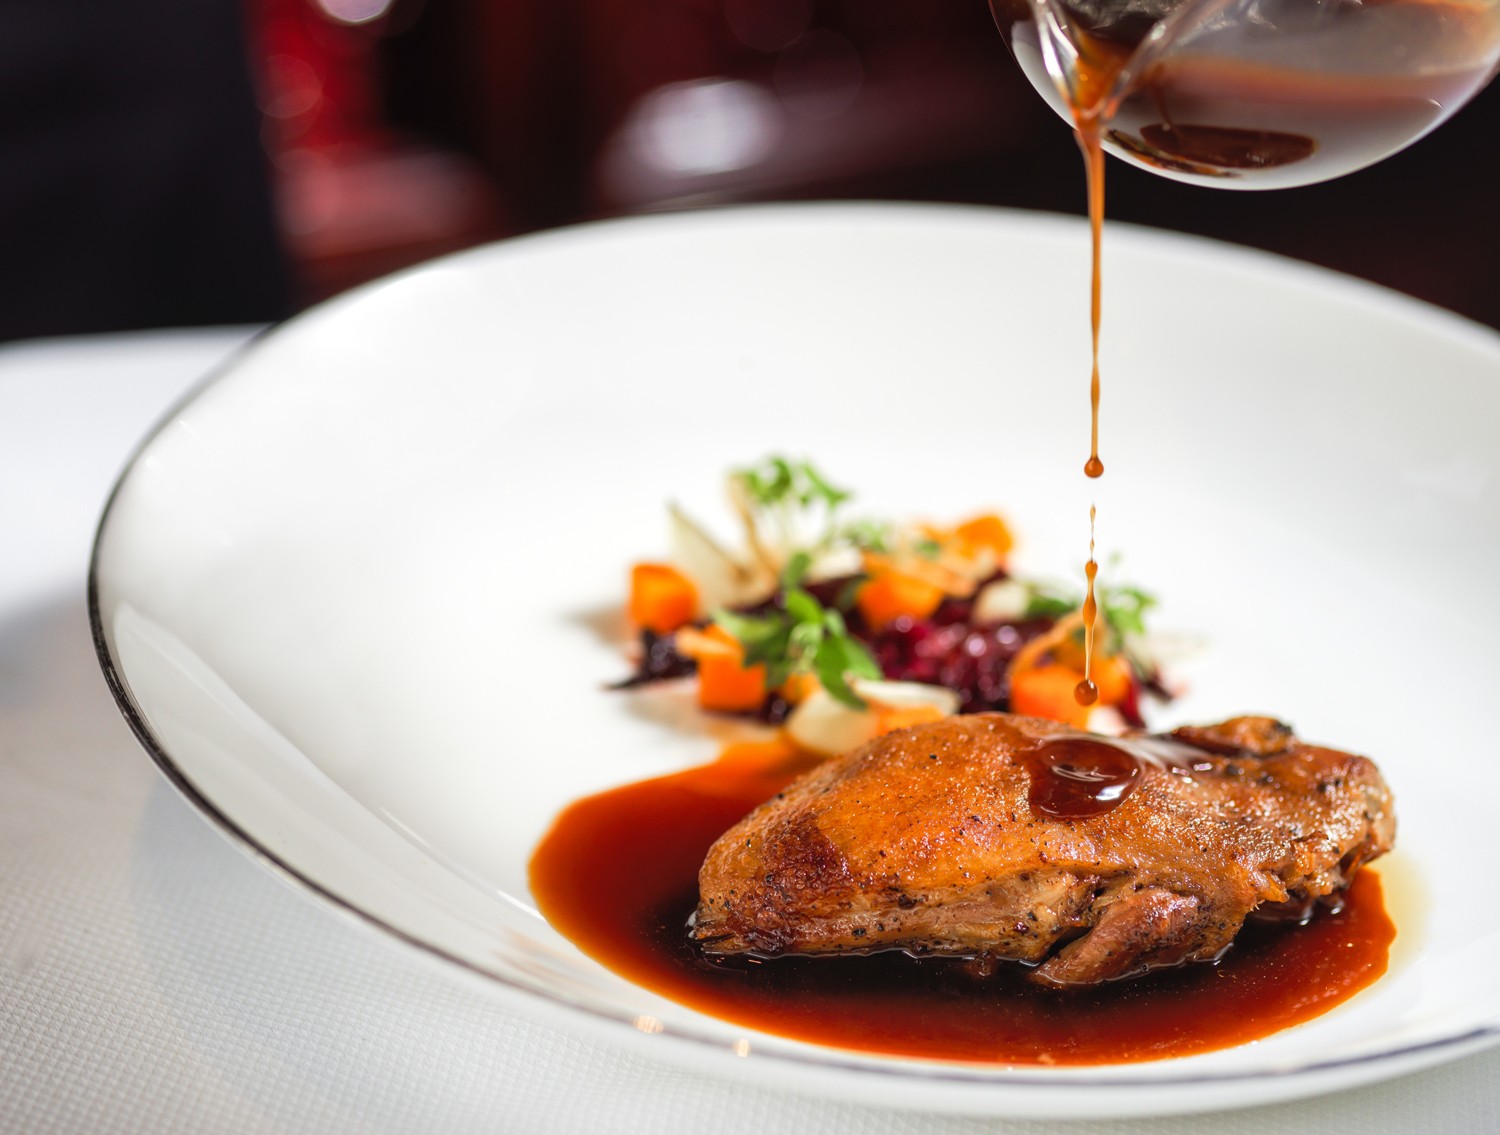 The slow-cooked Silver Hill Duck confit with braised radicchio, white onion puree, pickled pumpkin and orange jus.